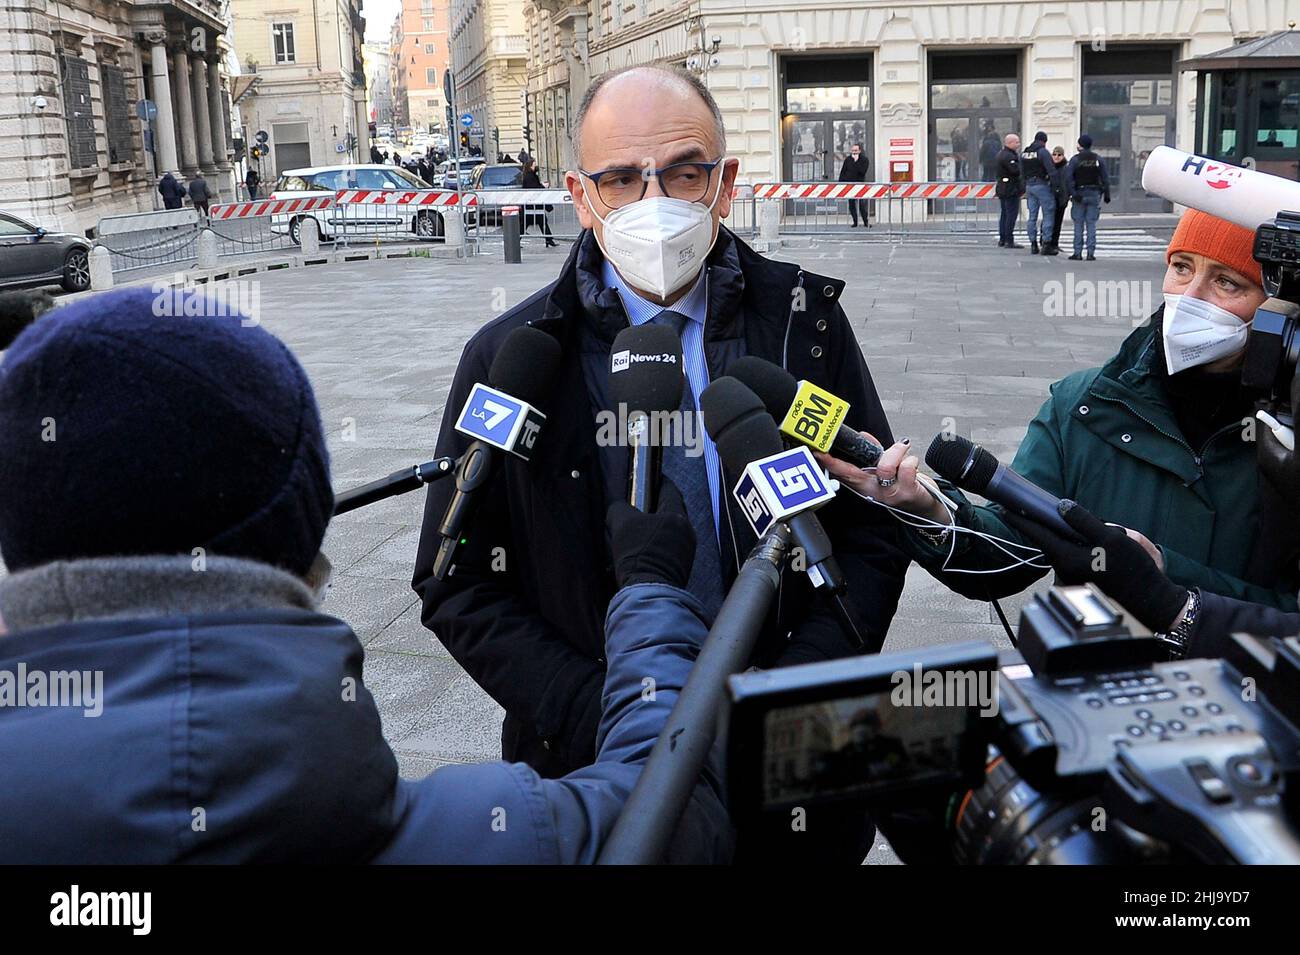 Enrico Letta is an Italian politician and academic, president of the Council of Ministers of the Italian Republic, outside the Montecitorio, during the elections of the new President of the Italian Republic in Rome. Credit: Vincenzo Izzo/Alamy Live News Stock Photo